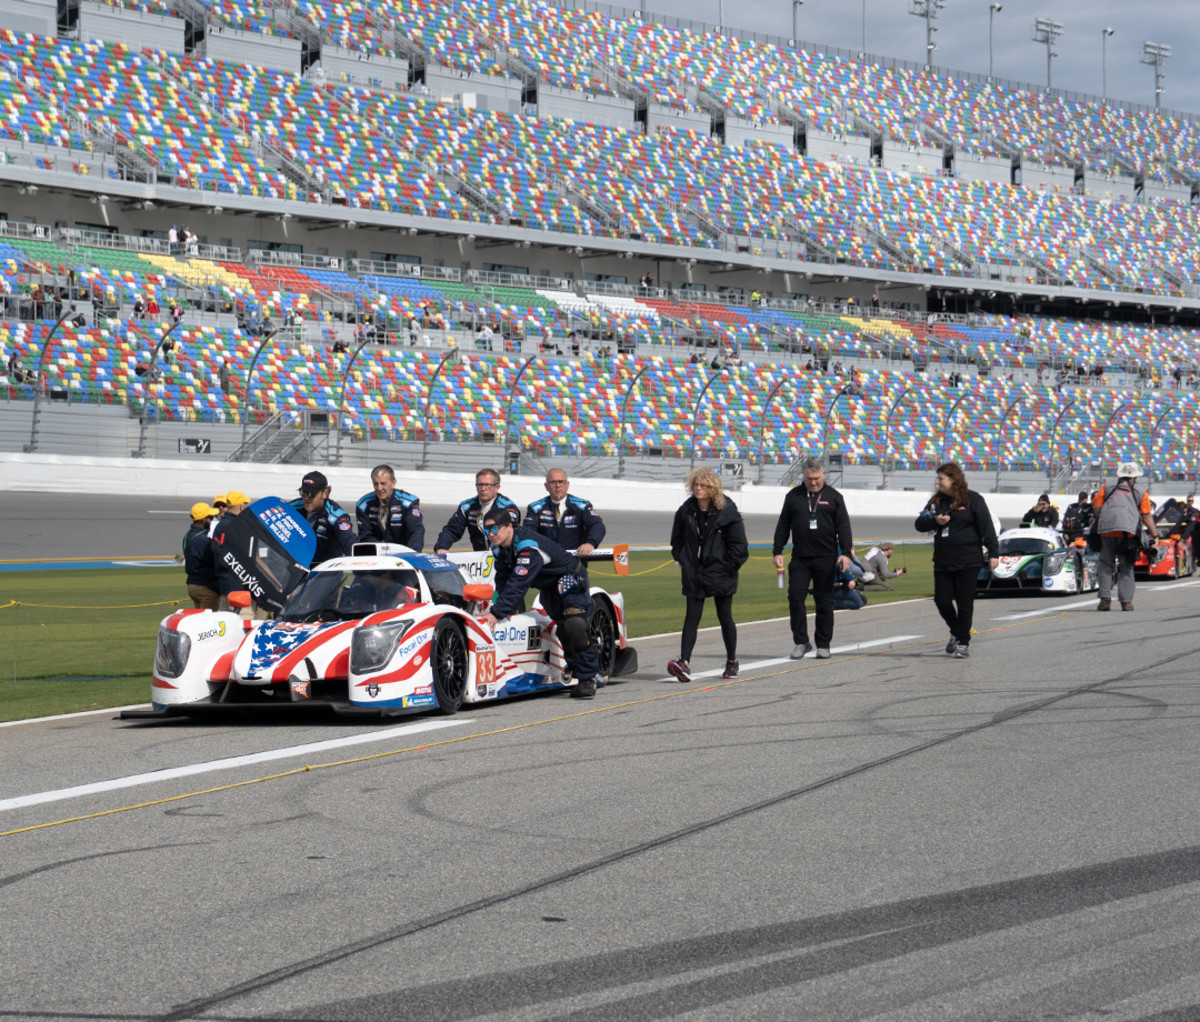 Racecar drivers walking to a racecar on the track at Daytona Speedway.